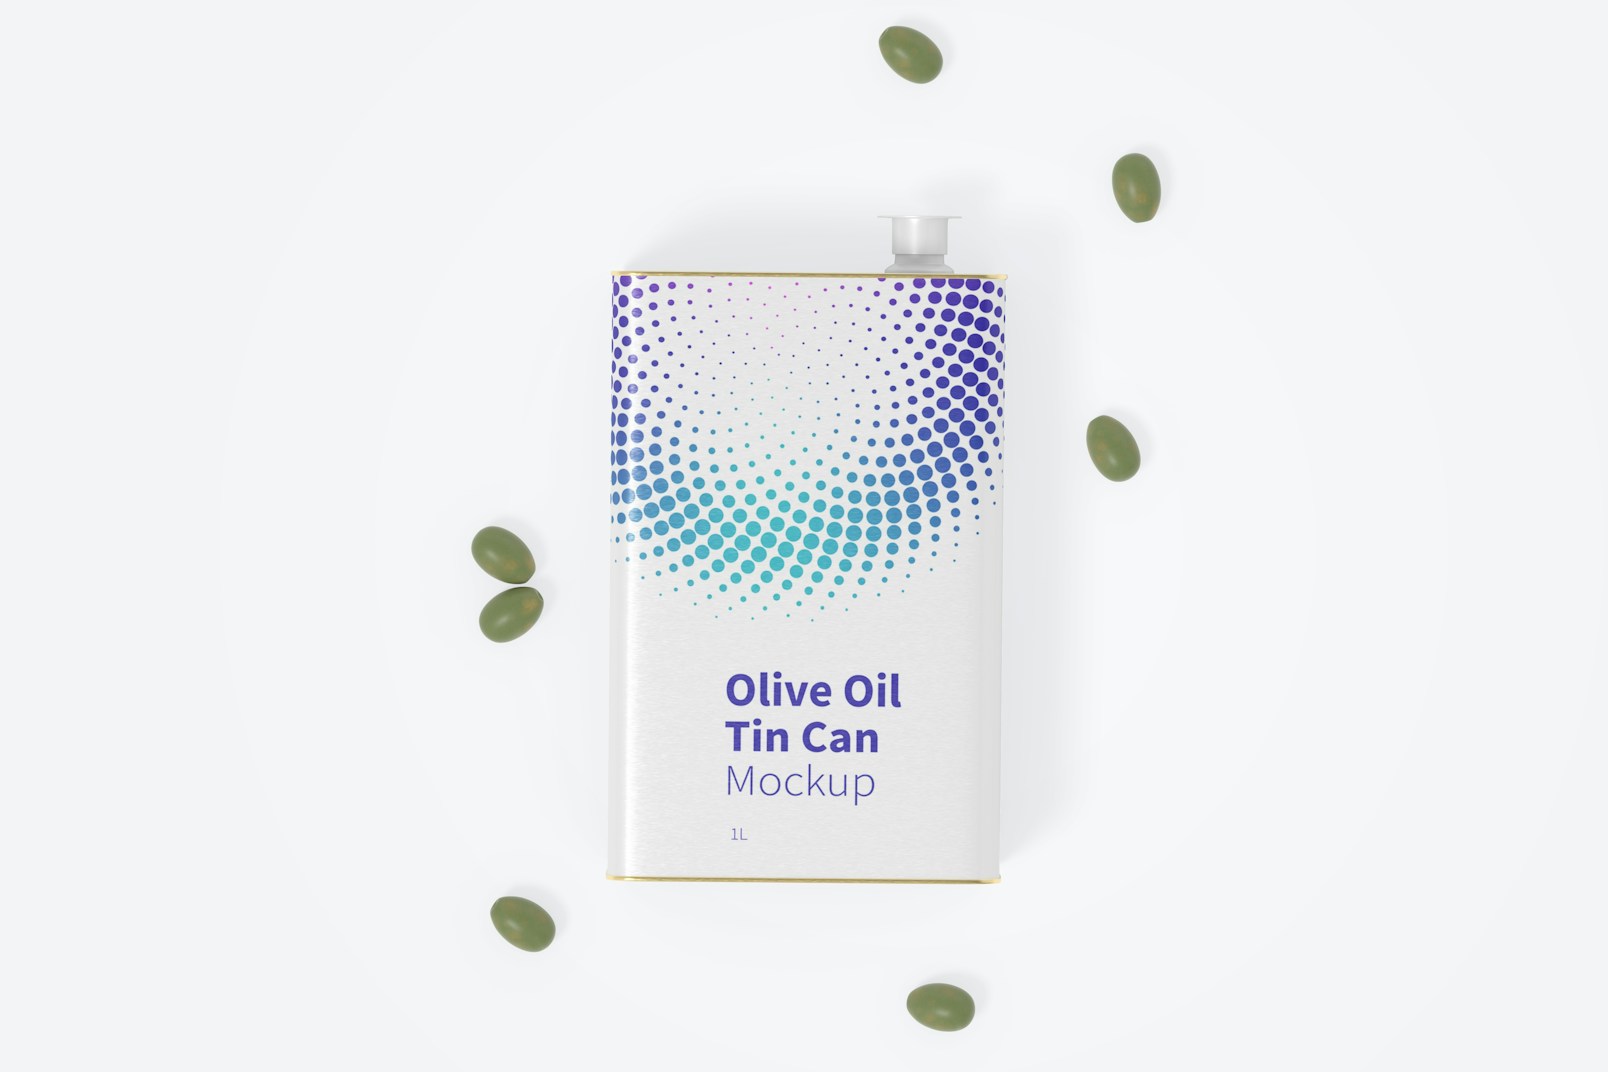 1 Liter Olive Oil Rectangular Tin Can Mockup, Top View